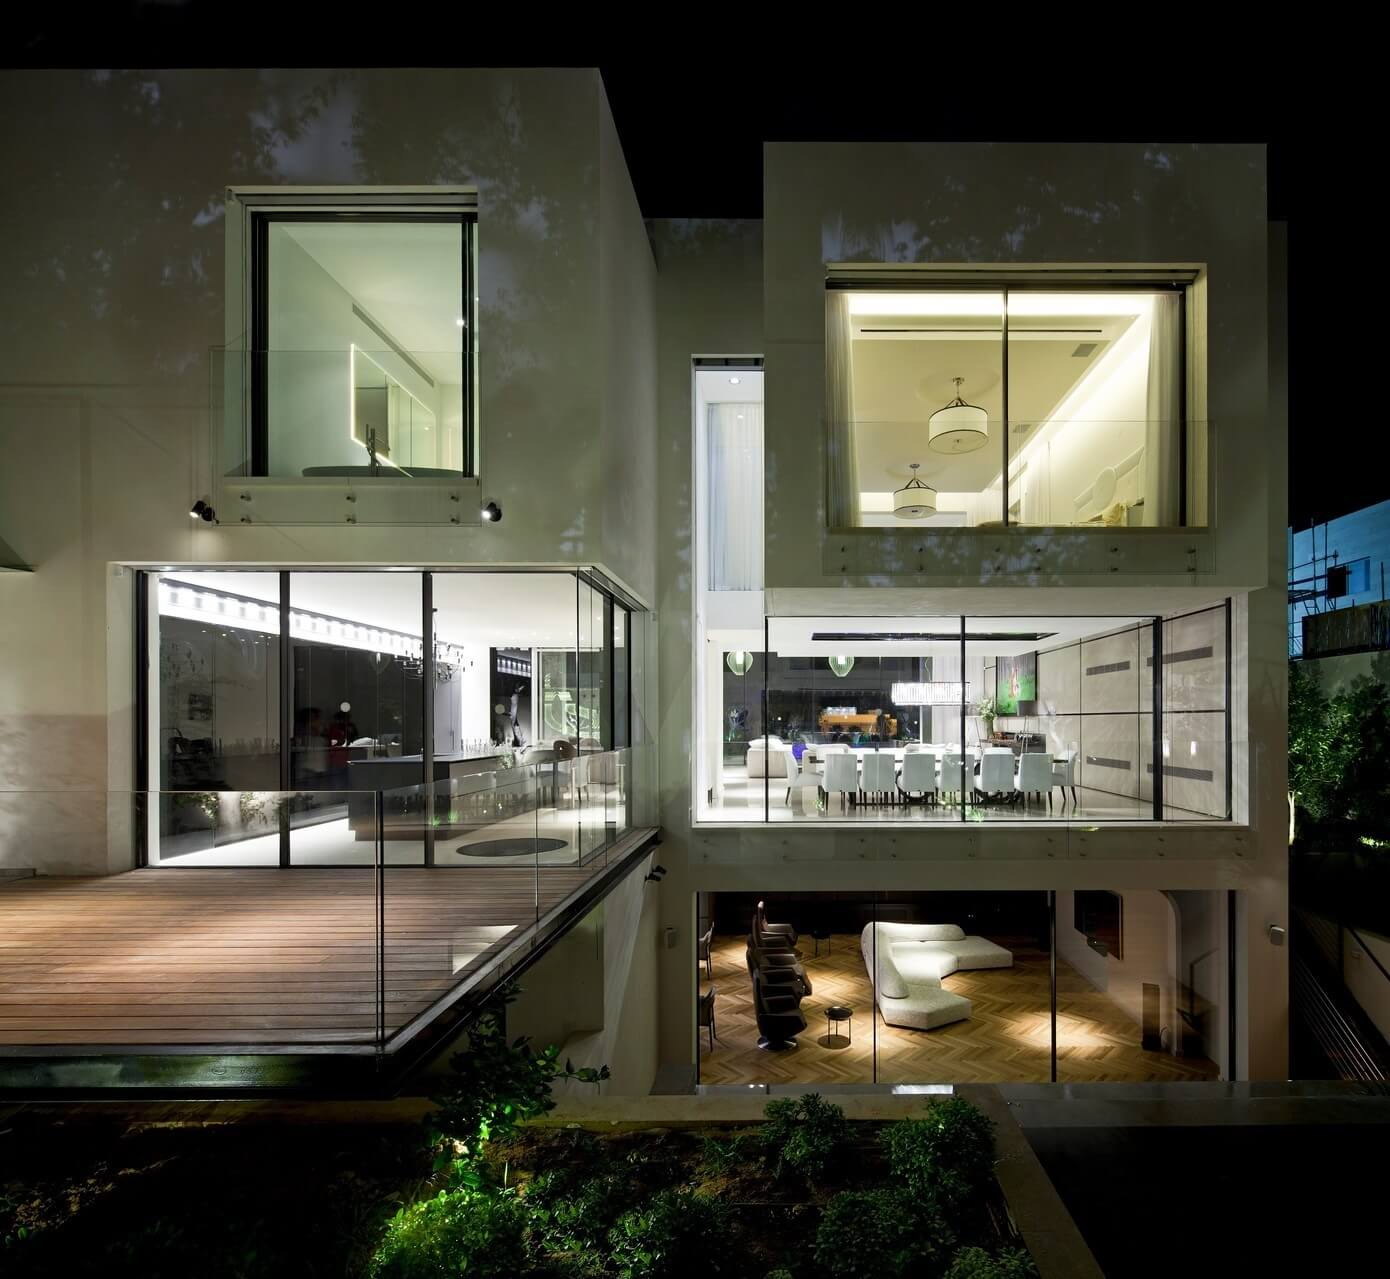 Hovering Cube House by Yulie Wollman